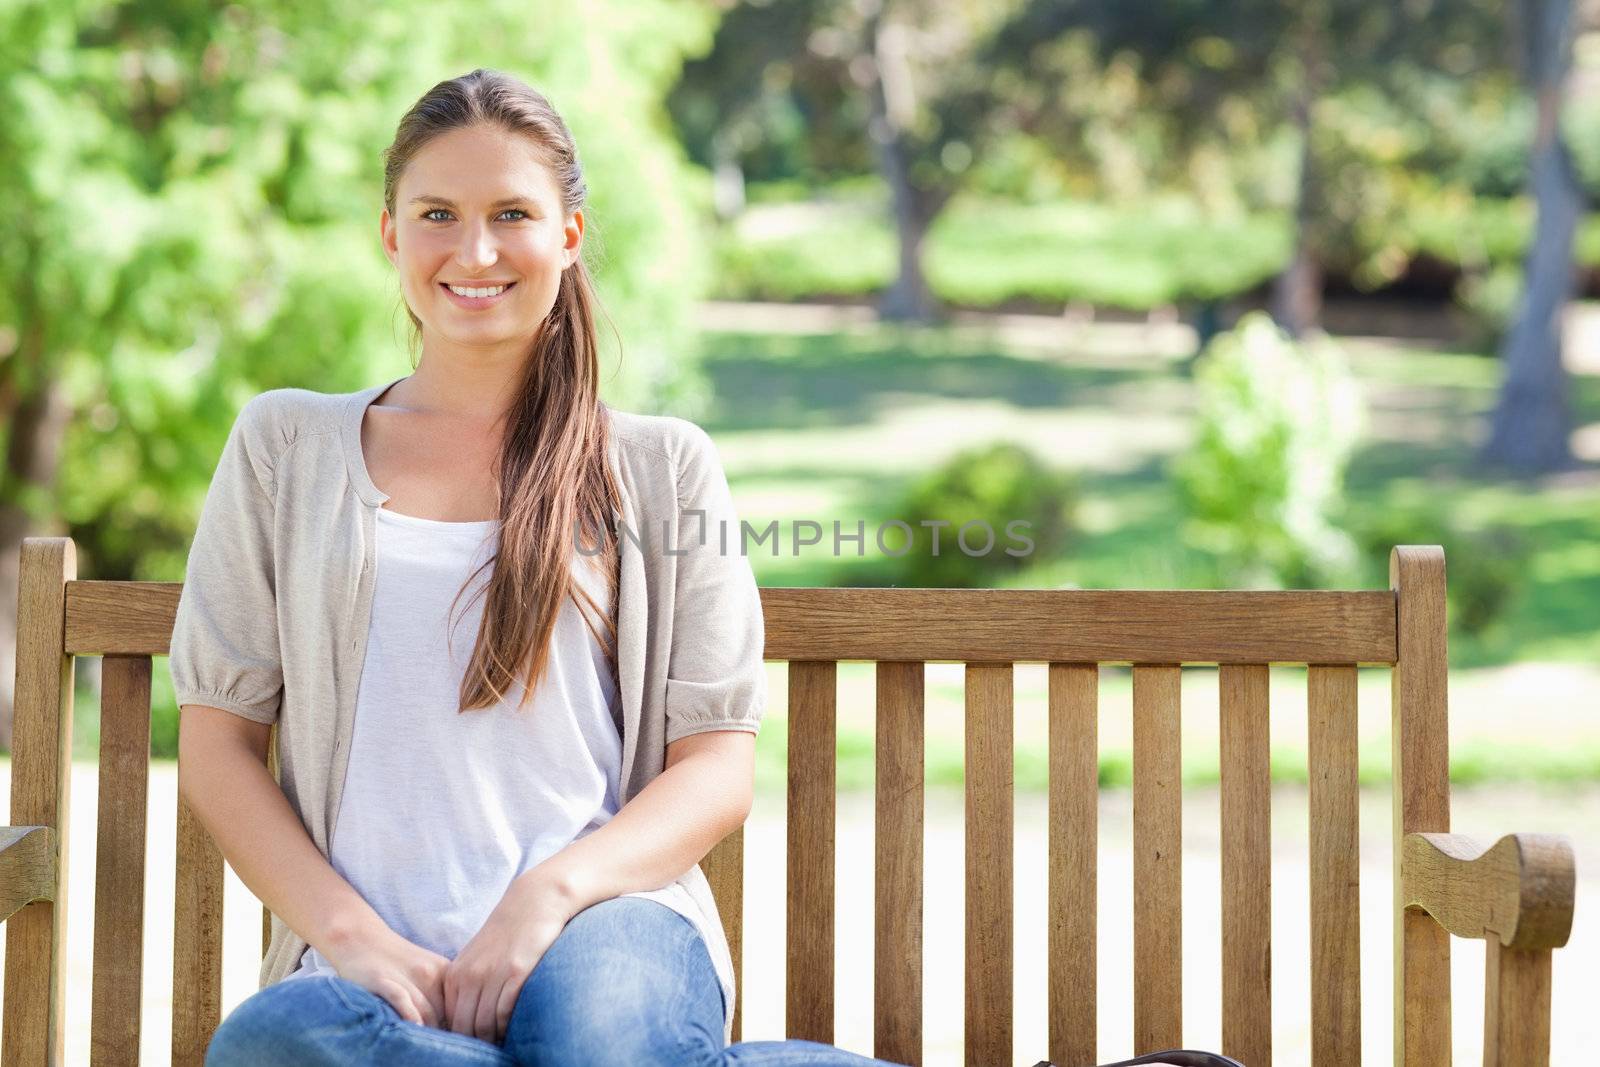 Smiling young woman relaxing in the park on a bench